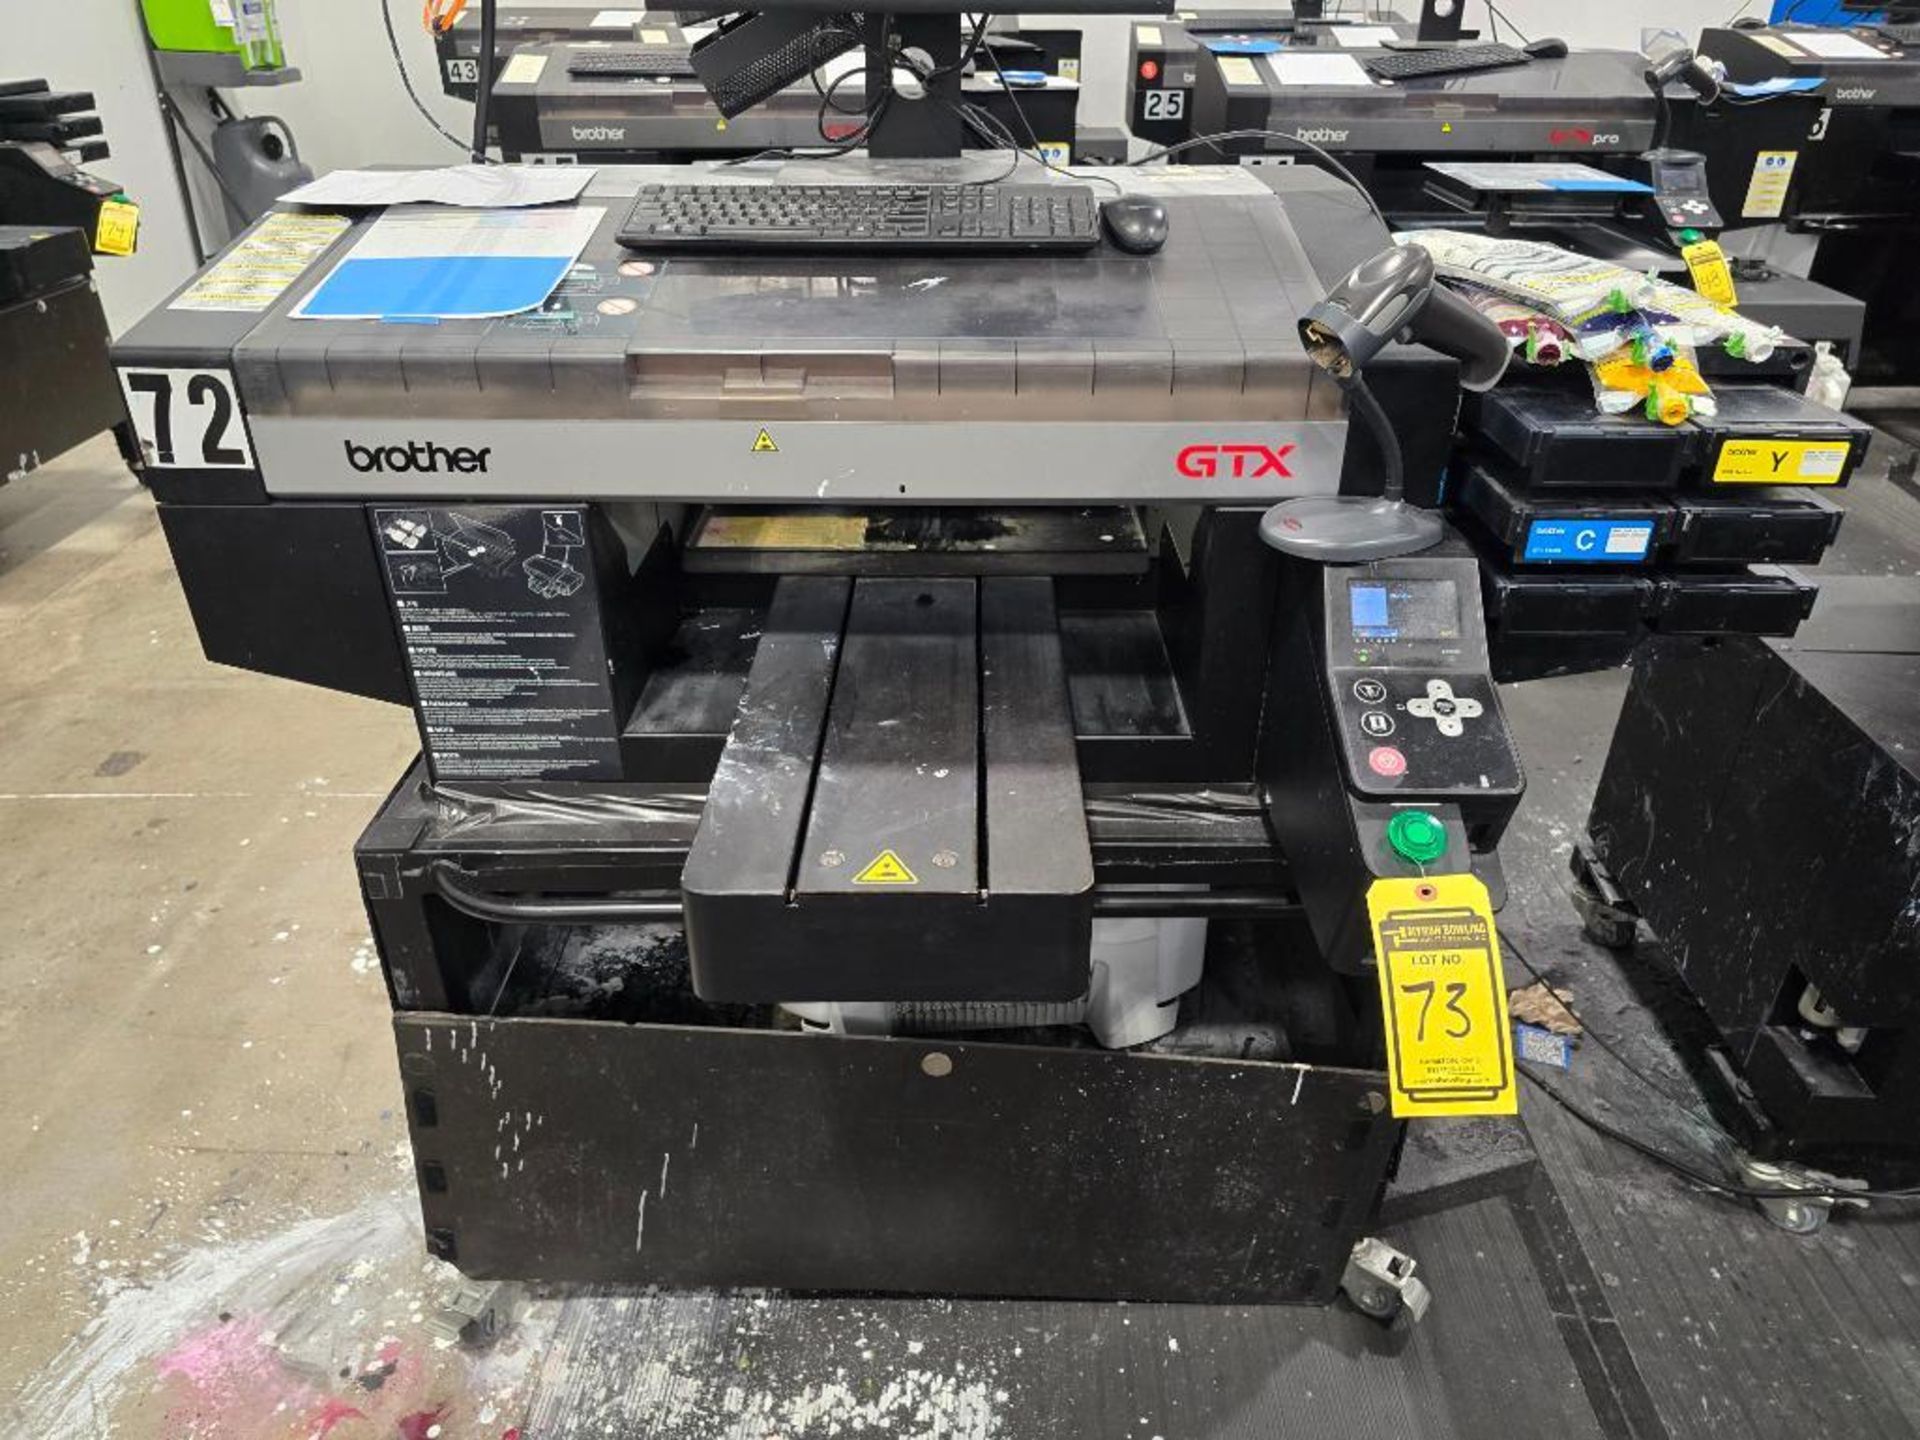 2018 Brother GTX-422 DTG (Direct to Garment) Printer, Twin Head, 6-Color, Water Based Pigmented Ink, - Image 4 of 9